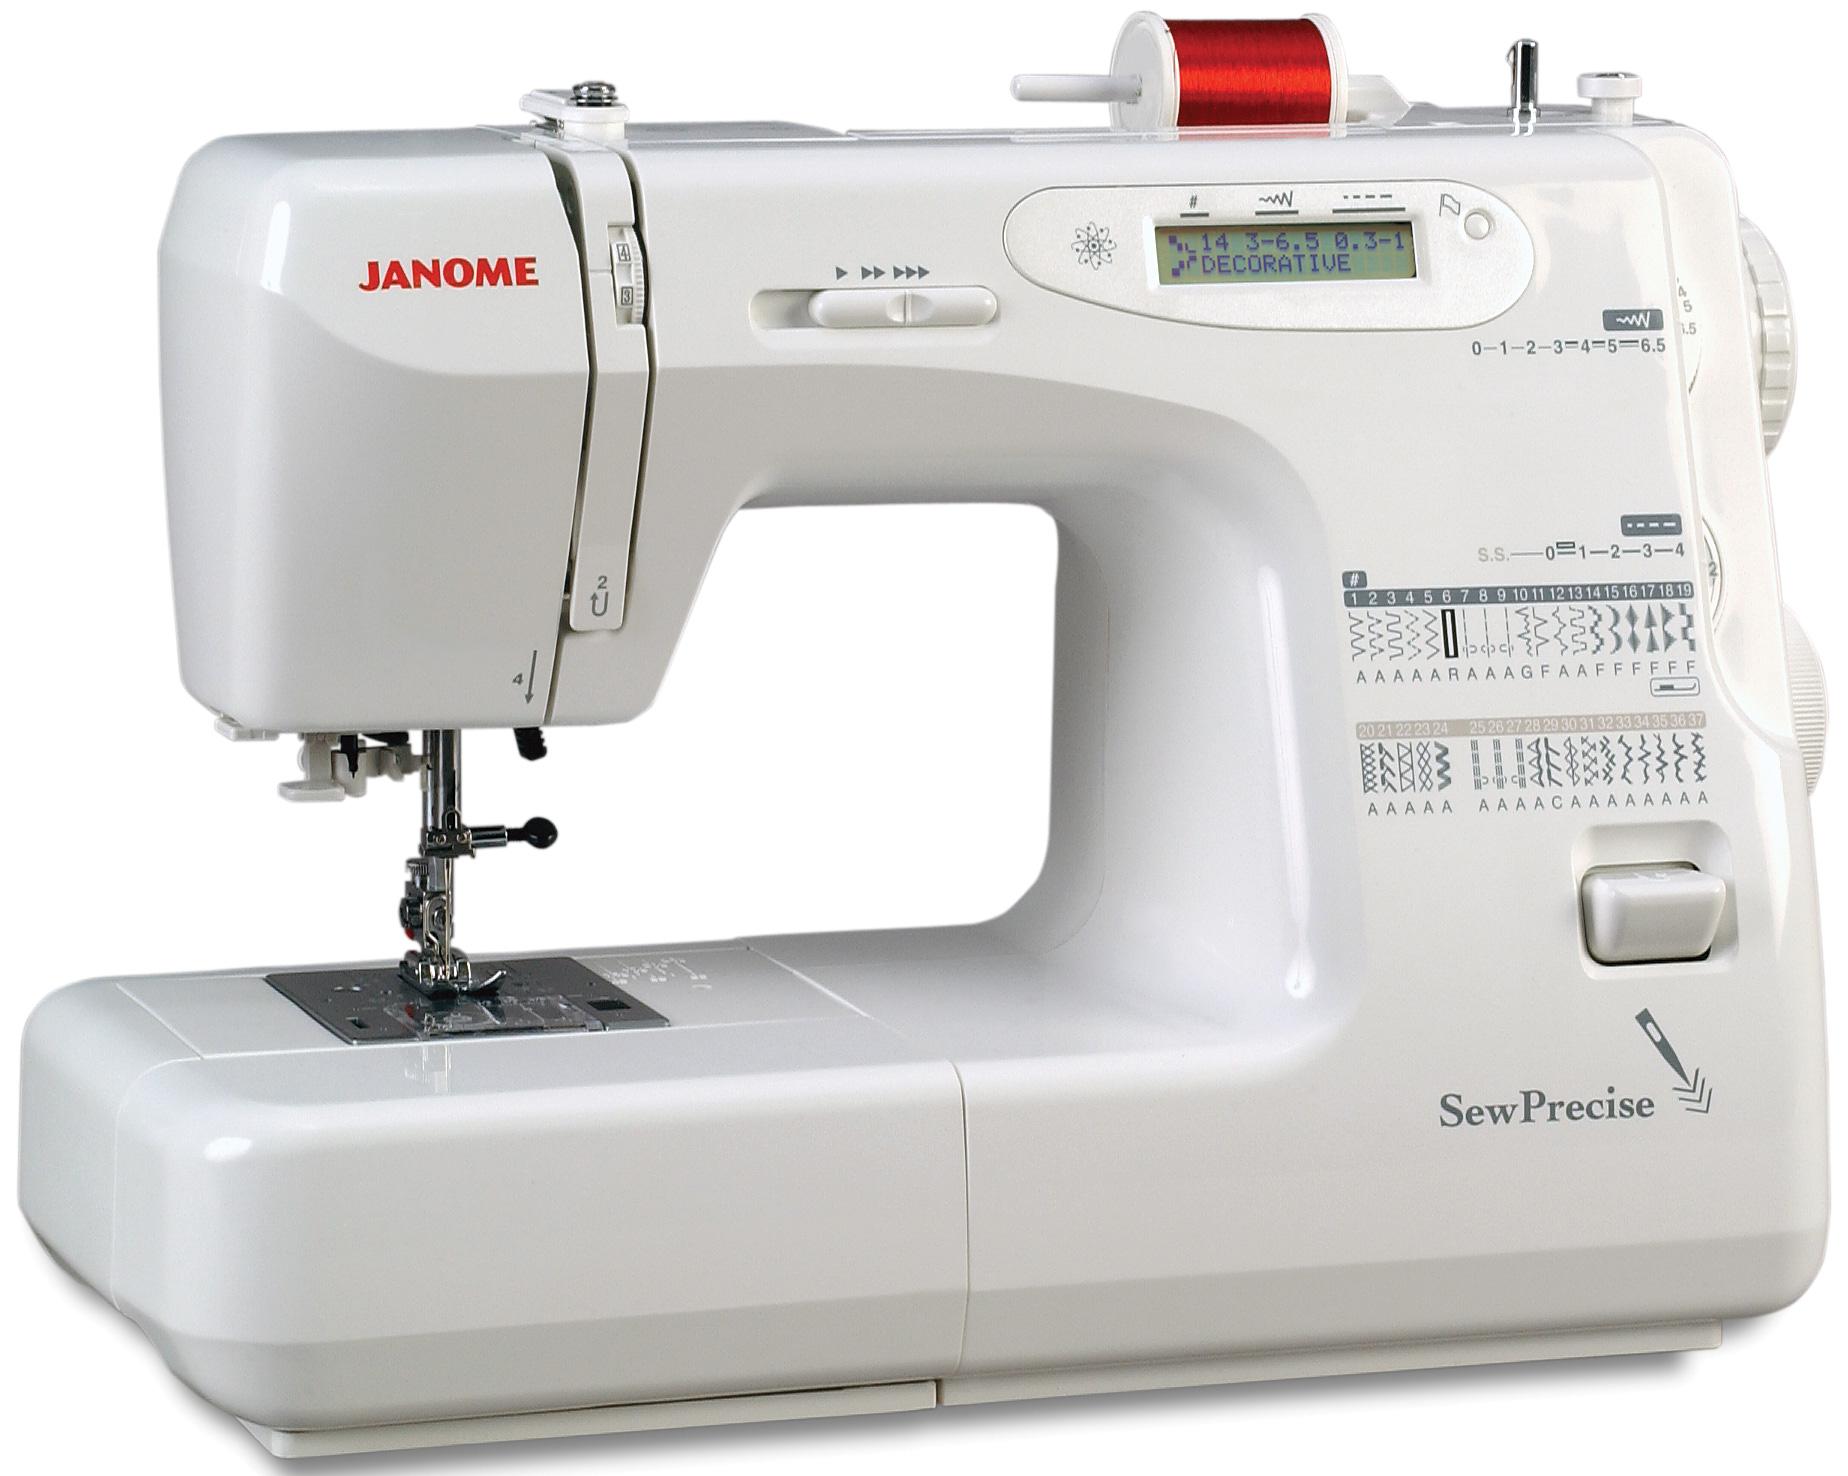 Janome Sew Precise Heavy Duty Mechanical Sewing Machine with Computerized Features